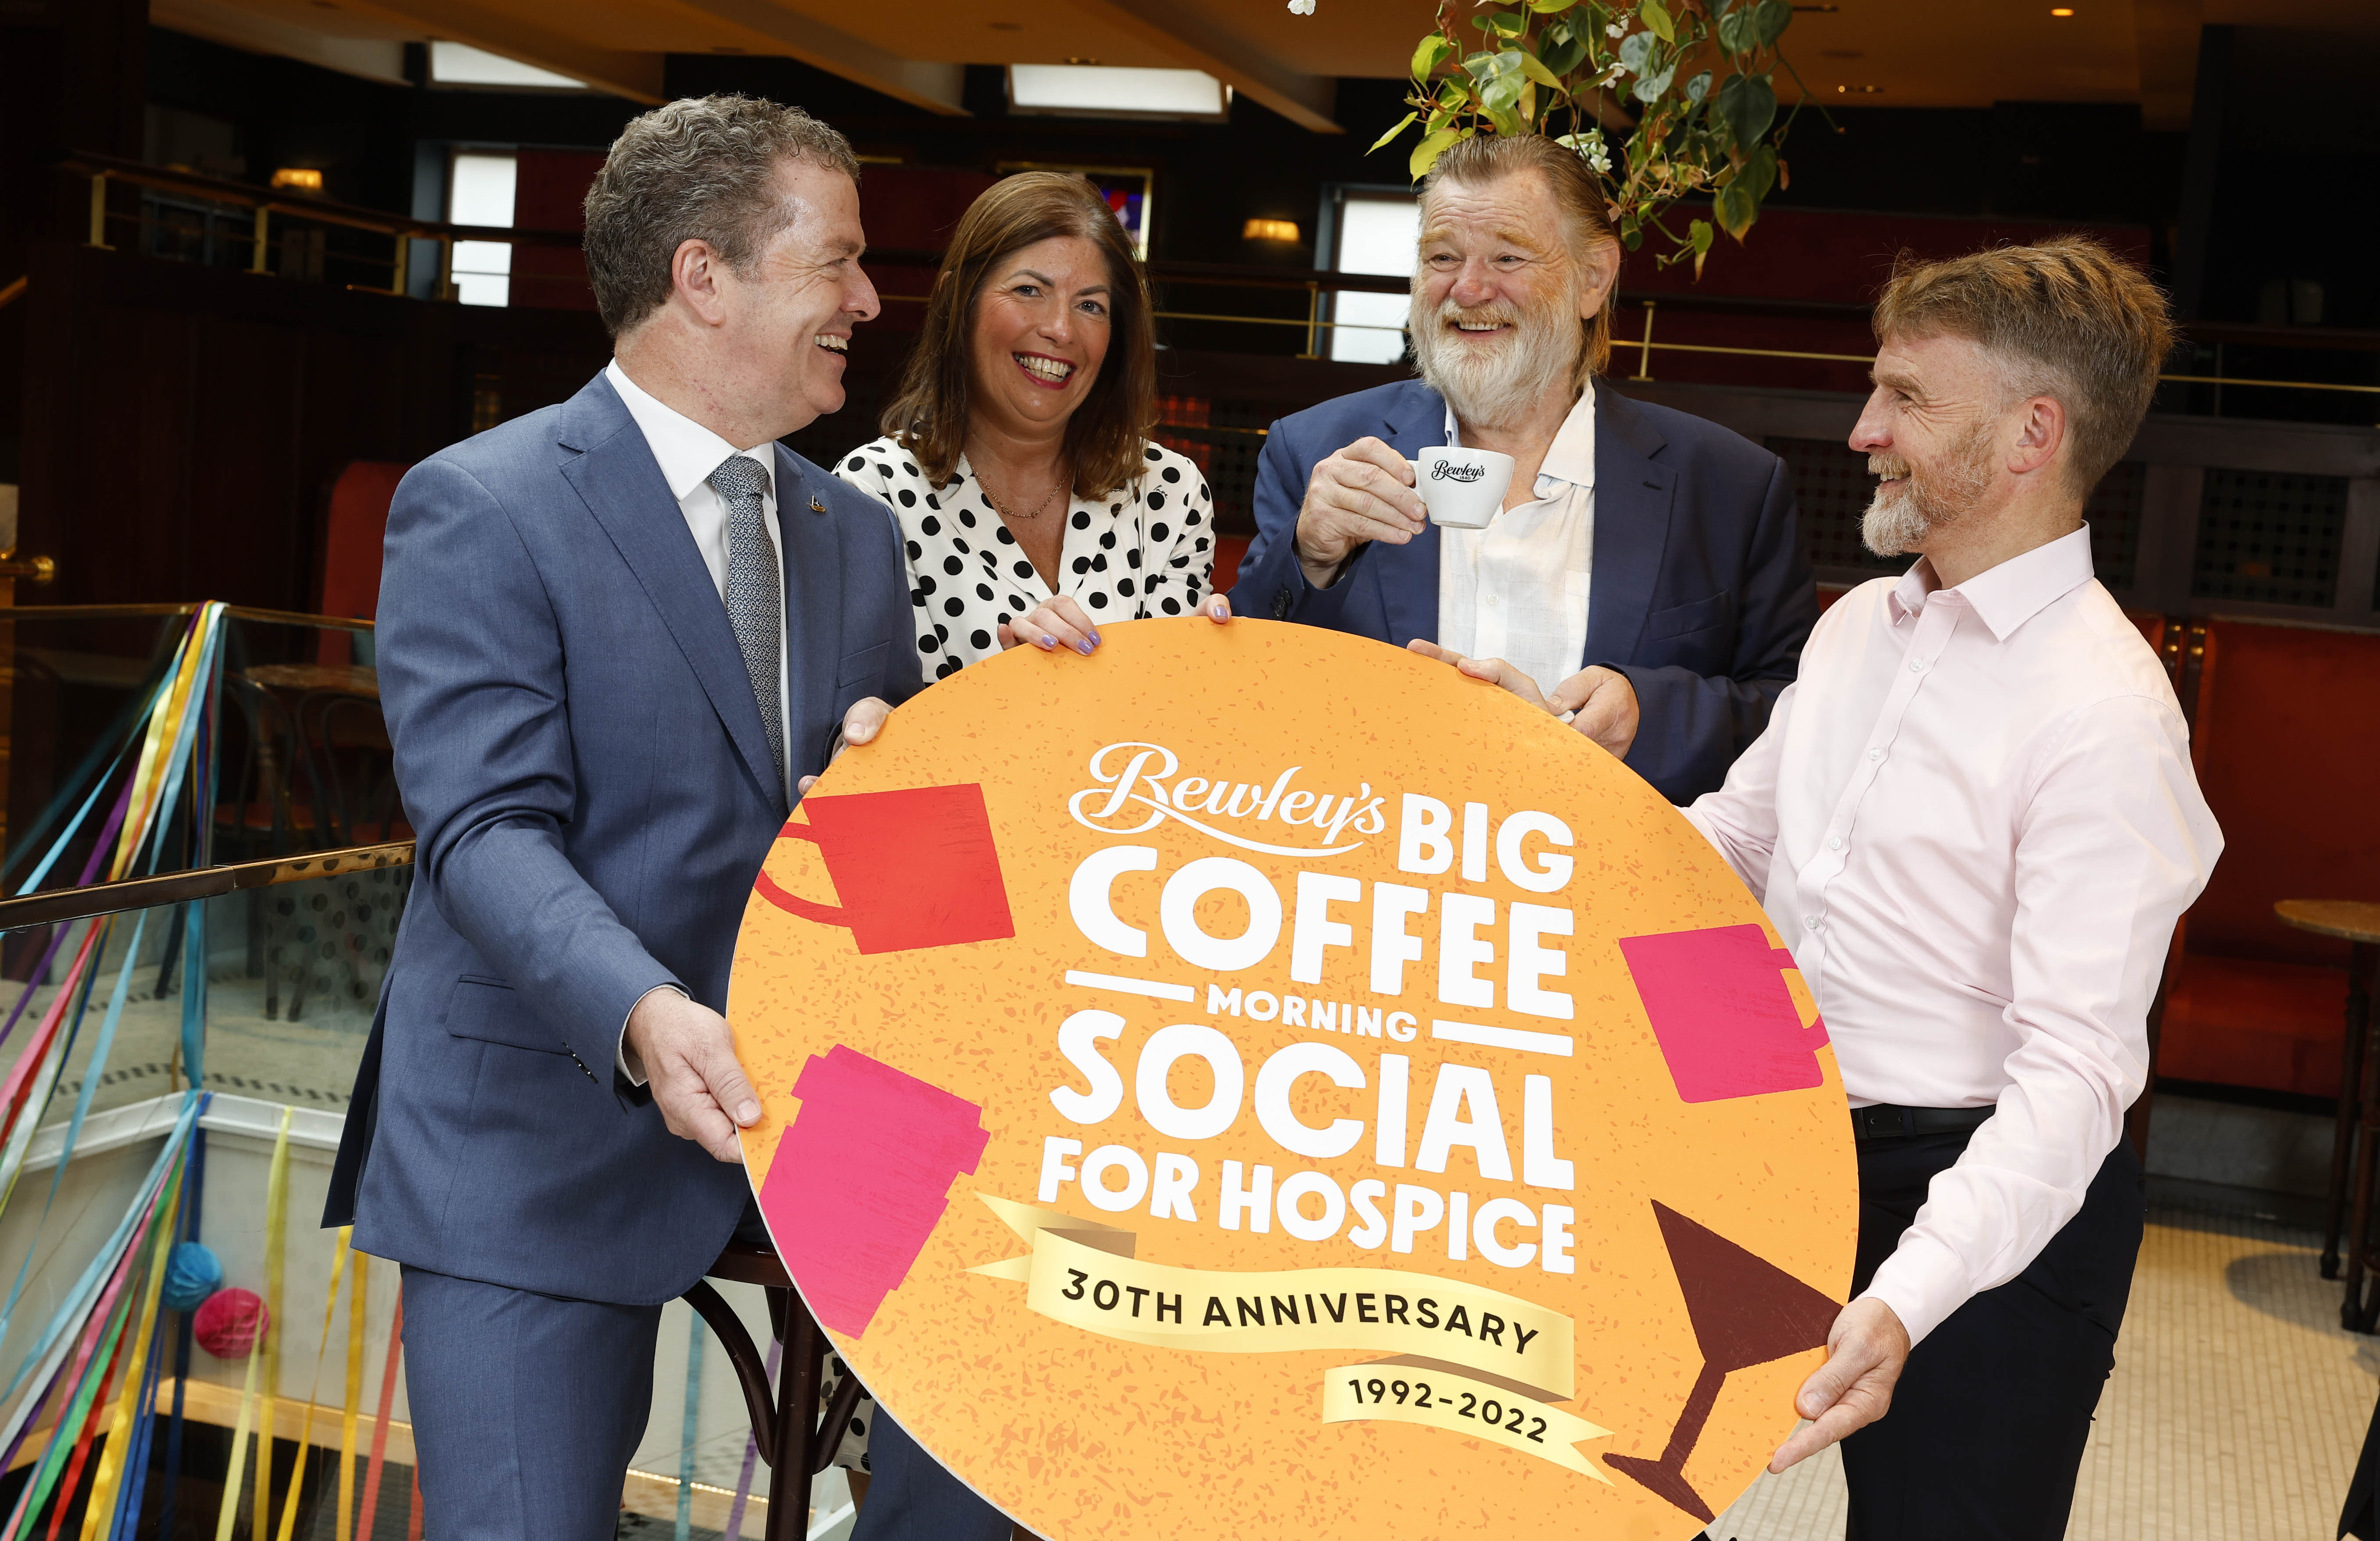 From left, Fintan Fagan, CEO at St Francis Hospice, Audrey Houlihan, chairwoman of Together For Hospice and CEO at Our Lady's Hospice & Care Services, actor Brendan Gleeson and Col Campbell of Bewley's pictured at the launch of Bewley's Big Coffee Morning Social for Hospice (Conor McCabe Photography/PA)